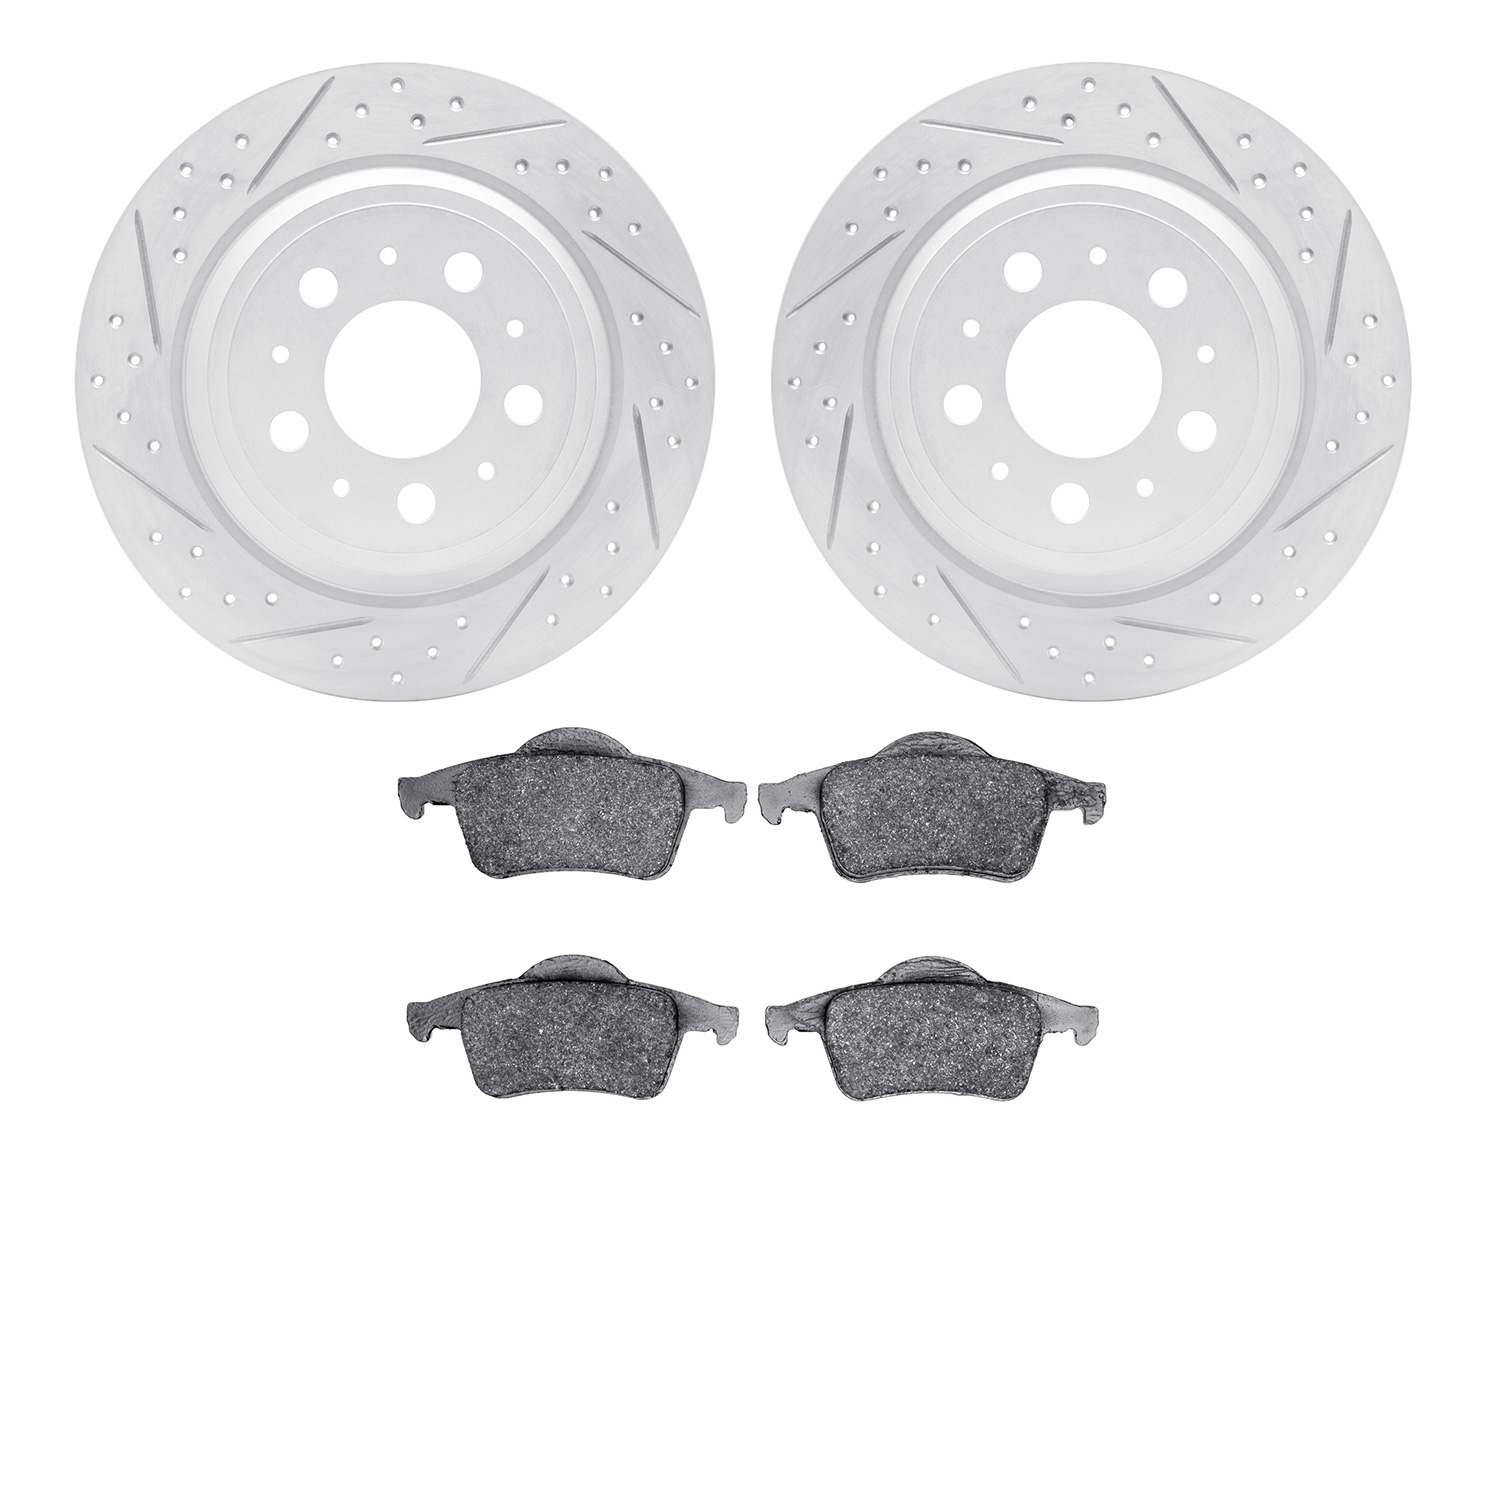 2502-27012 Geoperformance Drilled/Slotted Rotors w/5000 Advanced Brake Pads Kit, 1999-2009 Volvo, Position: Rear